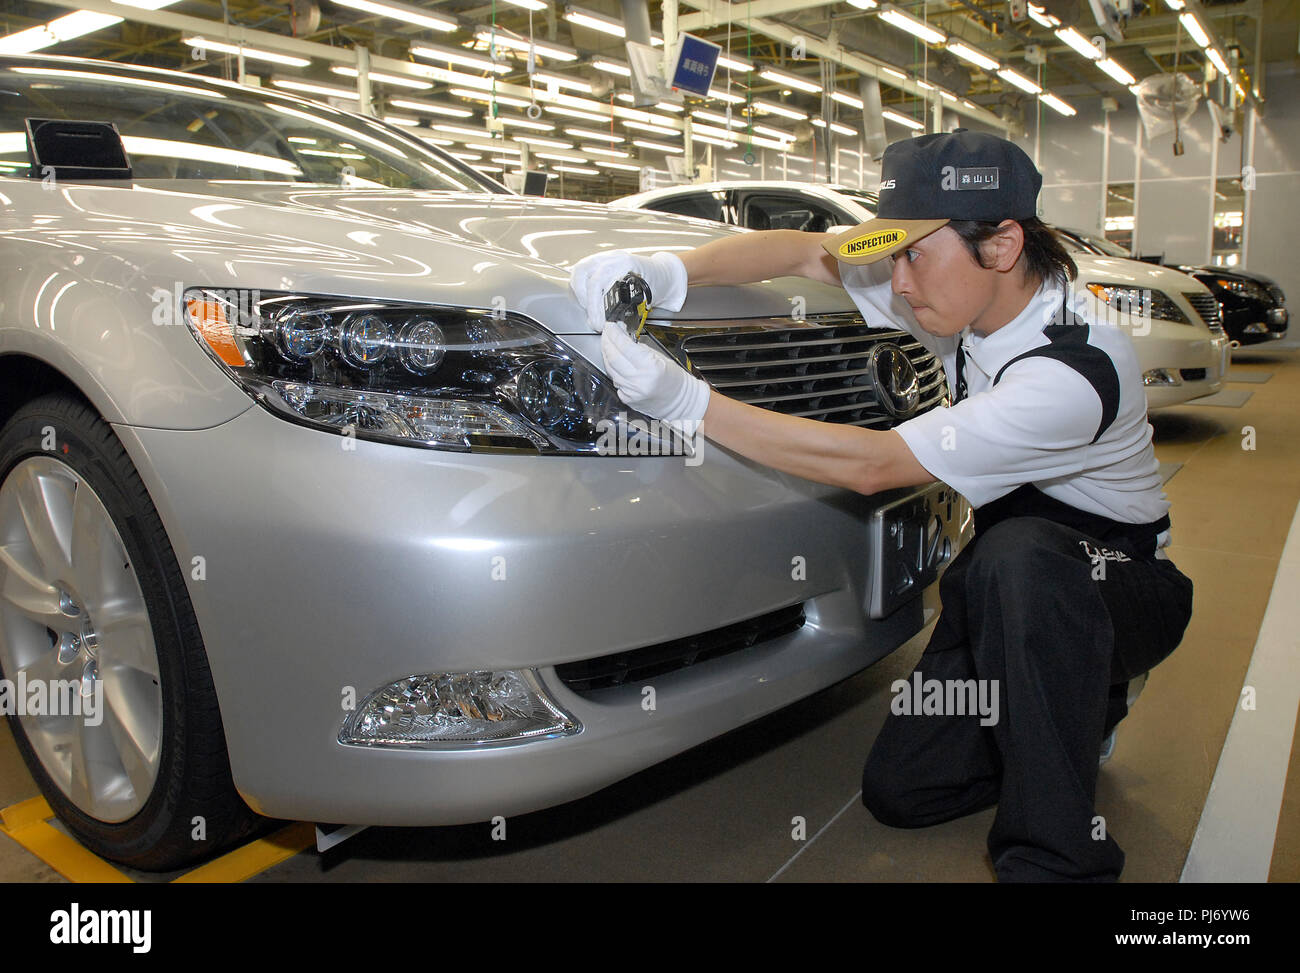 A worker inspects the body of a Toyota Motor Corp. Lexus vehicle for irregularities in panel fitting at the company's plant in Toyohashi City, Japan o Stock Photo